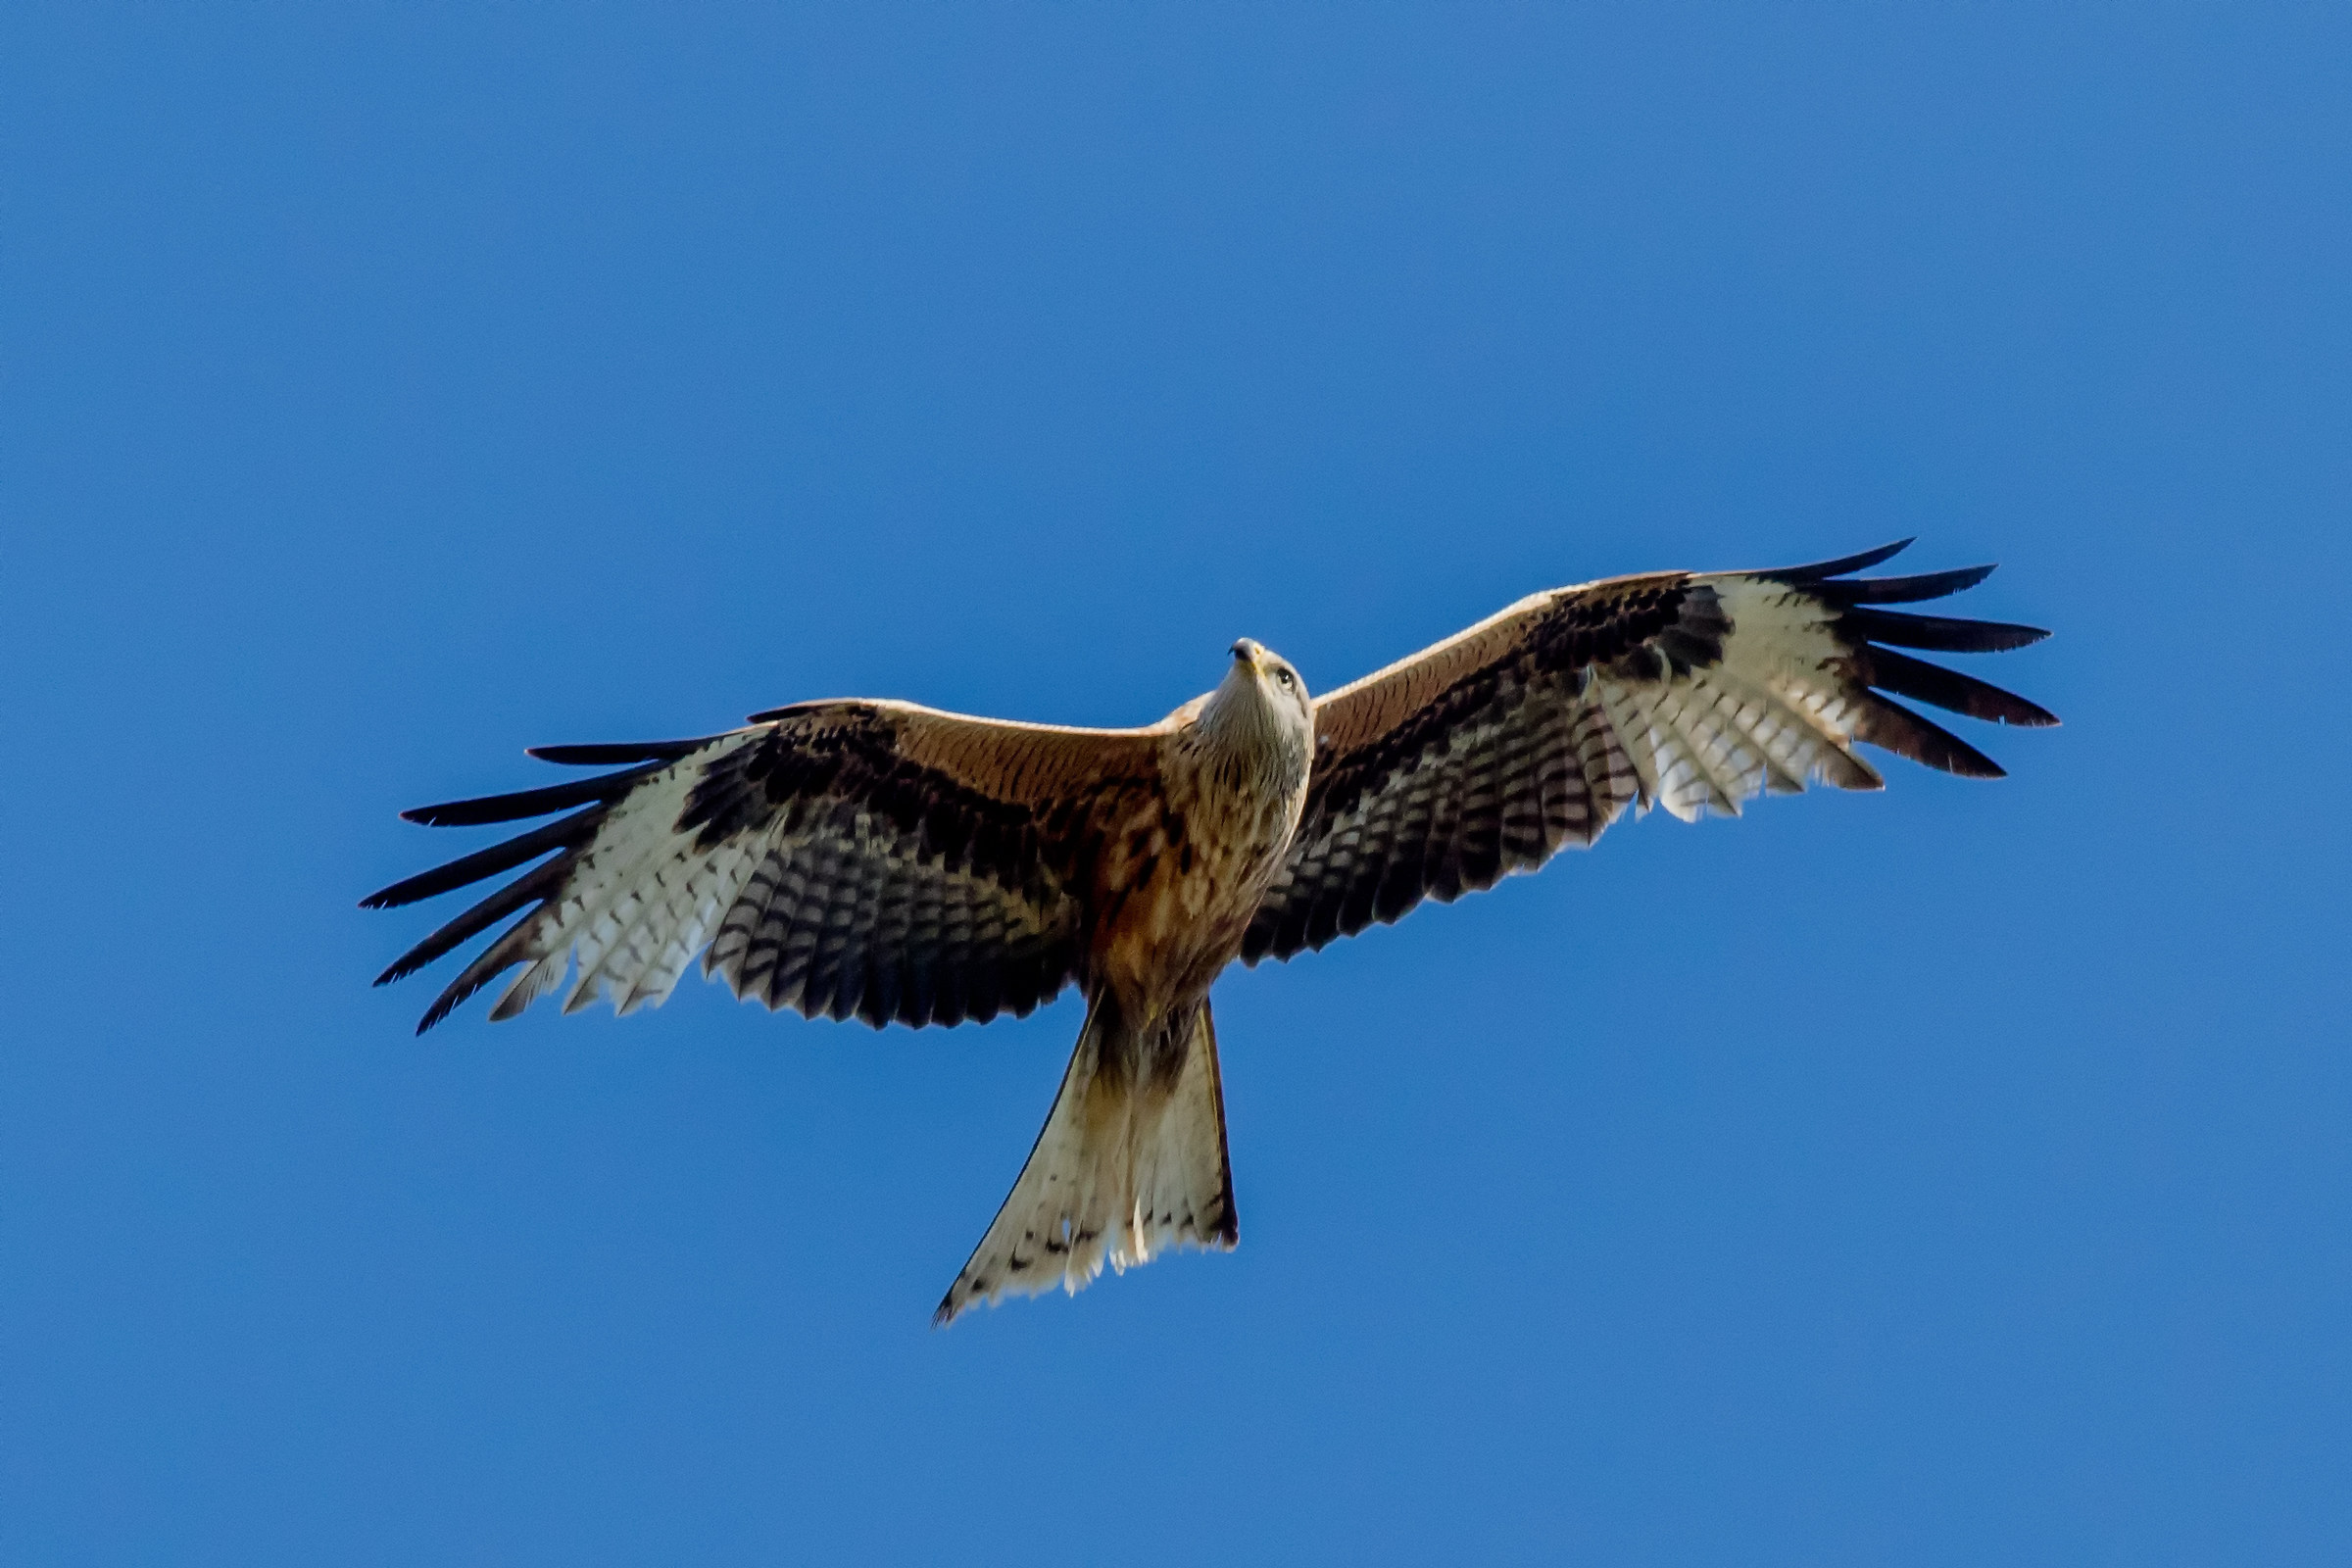 The Dream of the Red Kite...